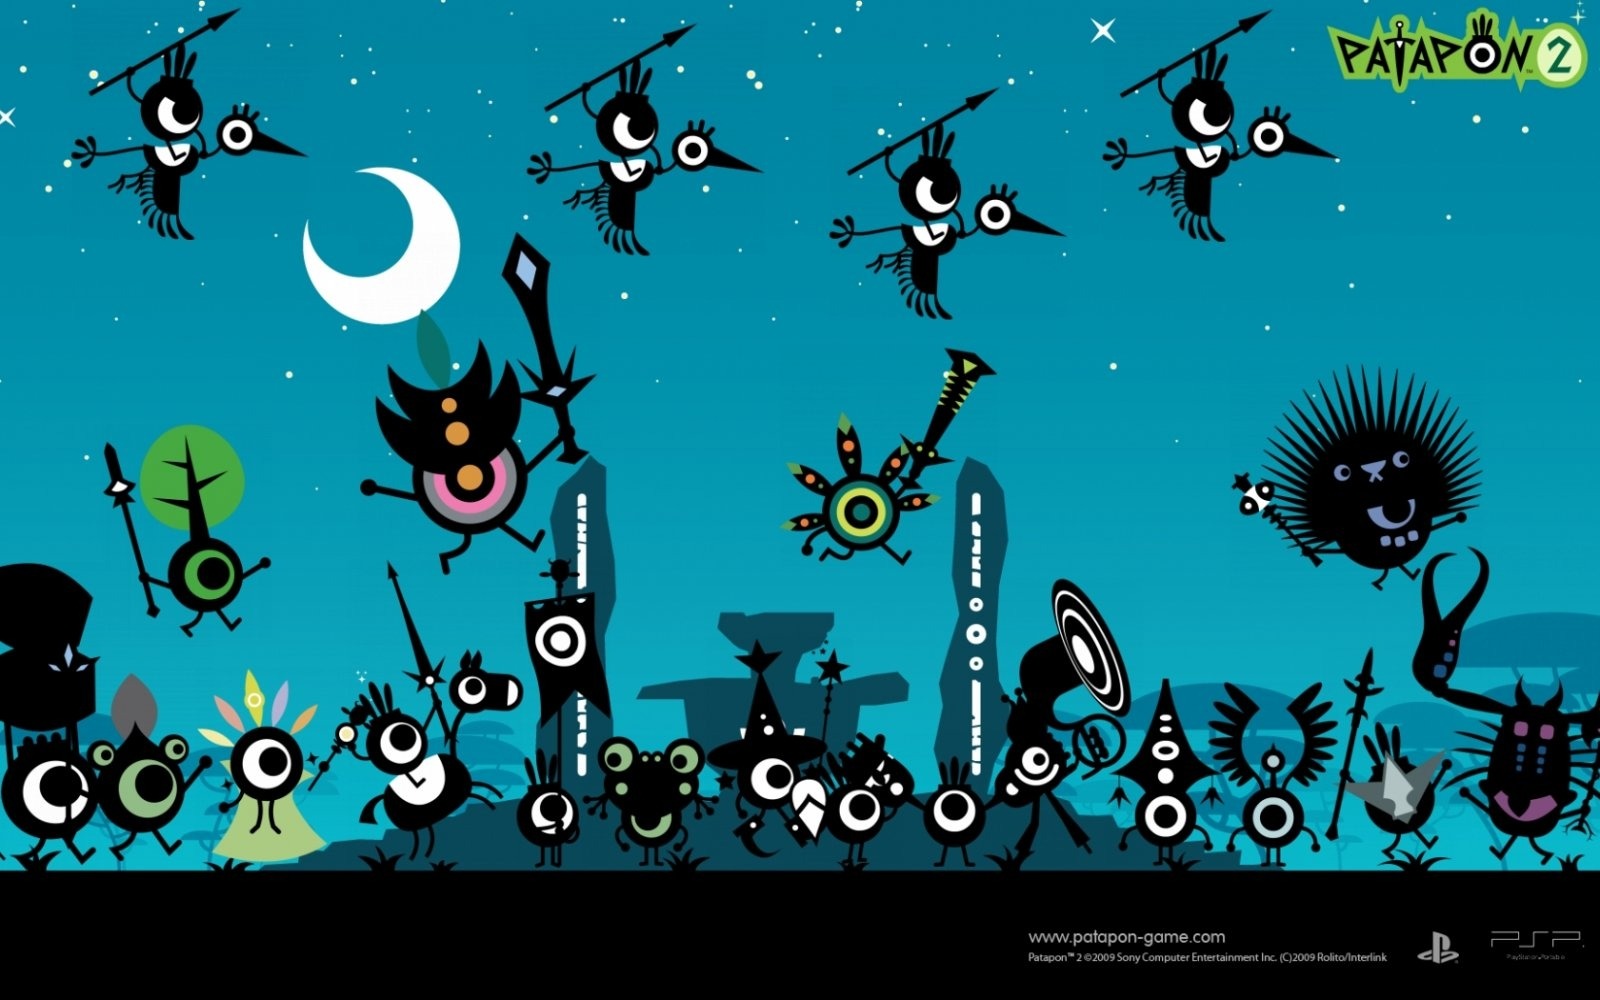 Amazing Patapon 2 Pictures & Backgrounds